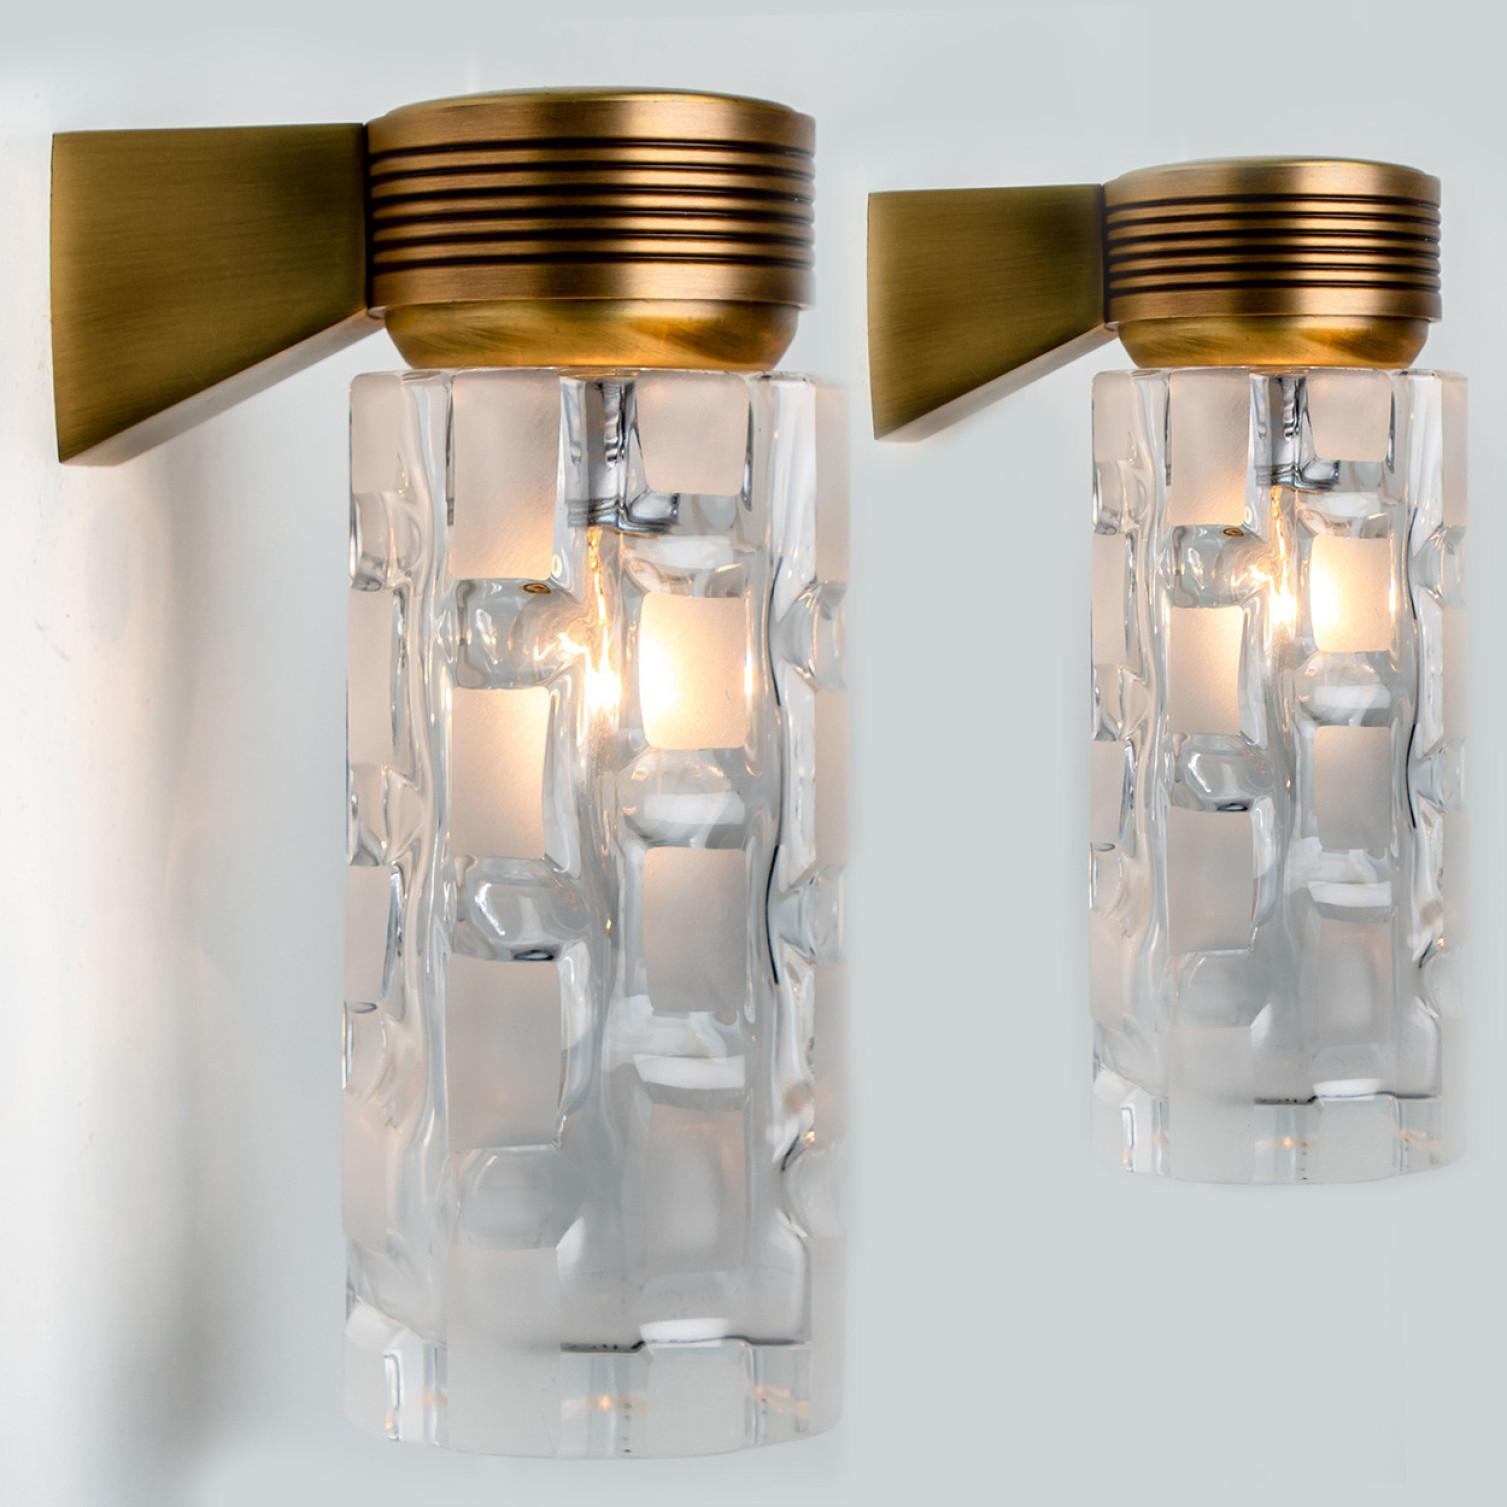 Pair Of Hillebrand Clear and Opaque Glass Wall Light Fixtures, 1970s For Sale 2